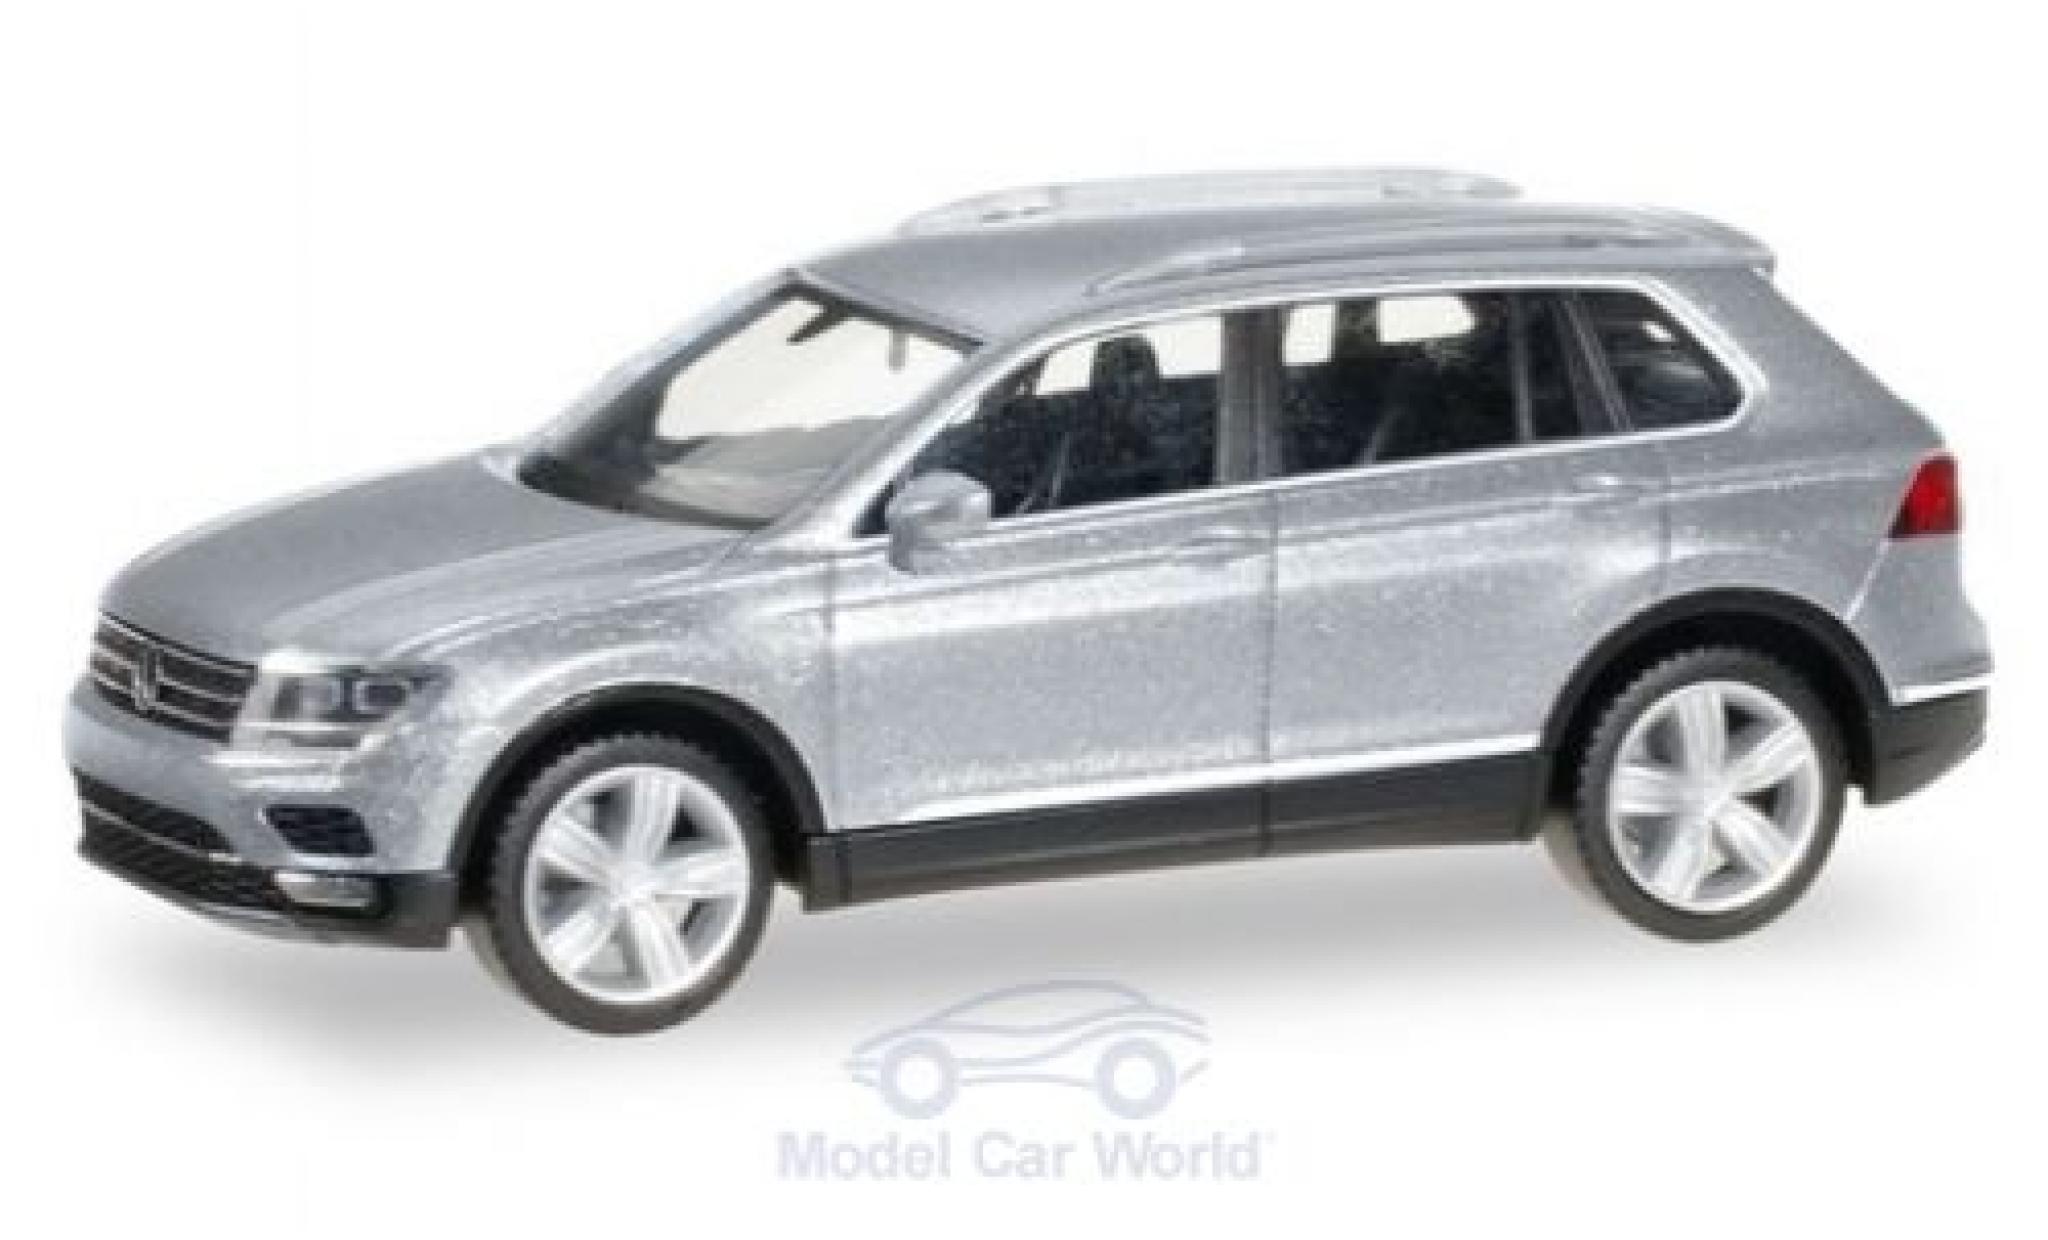 https://www.alldiecast.co.uk/images/images_miniatures/herpa-vw-tiguan-silber-1.jpg